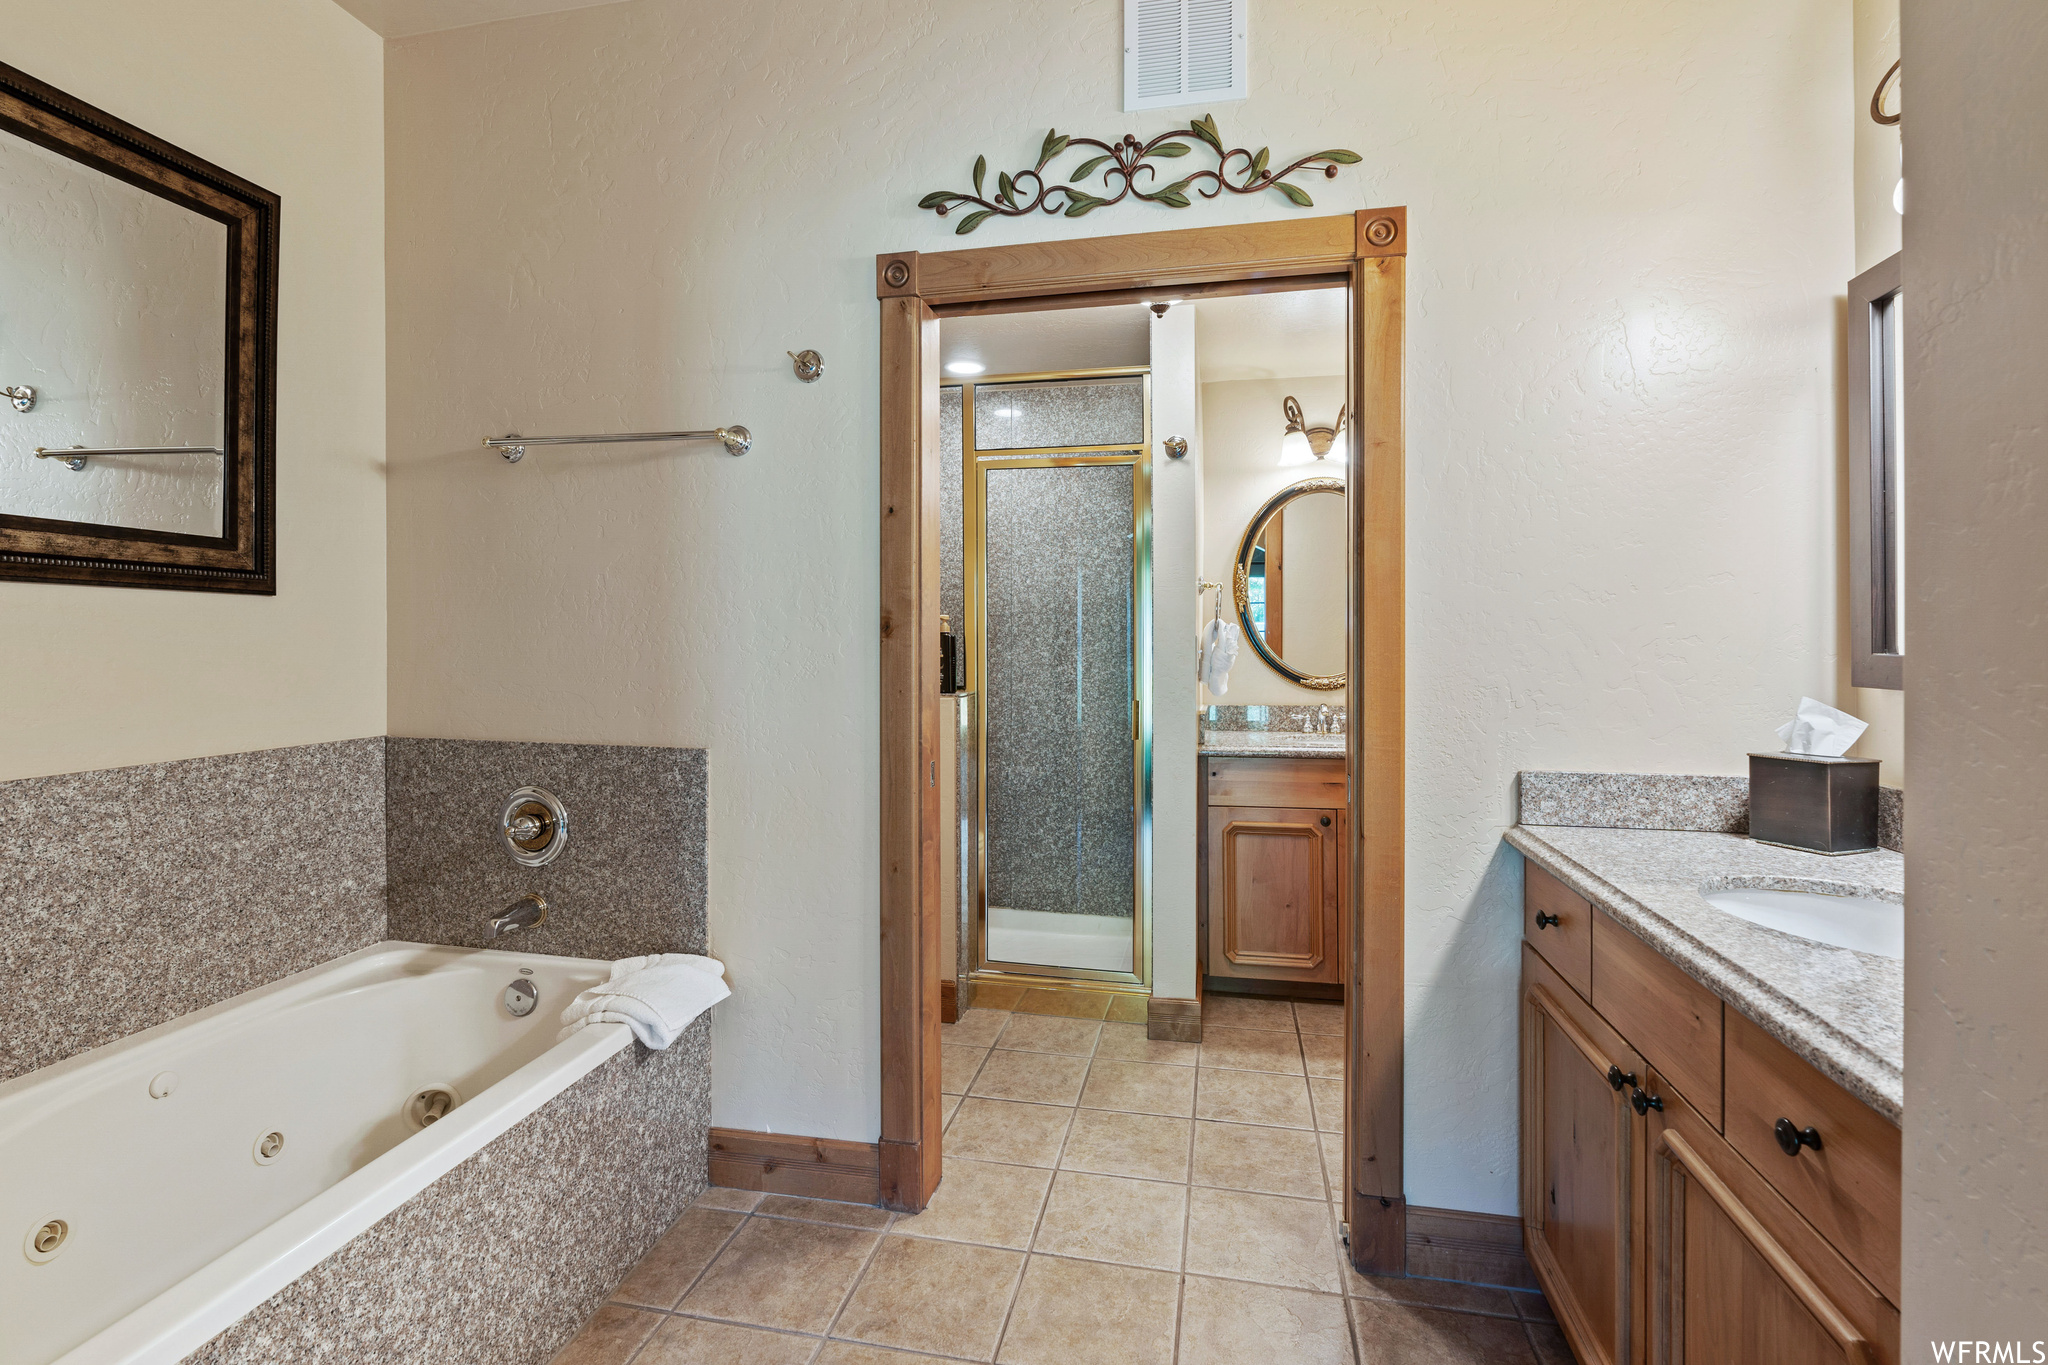 Bathroom with tile floors, separate shower and tub, and vanity